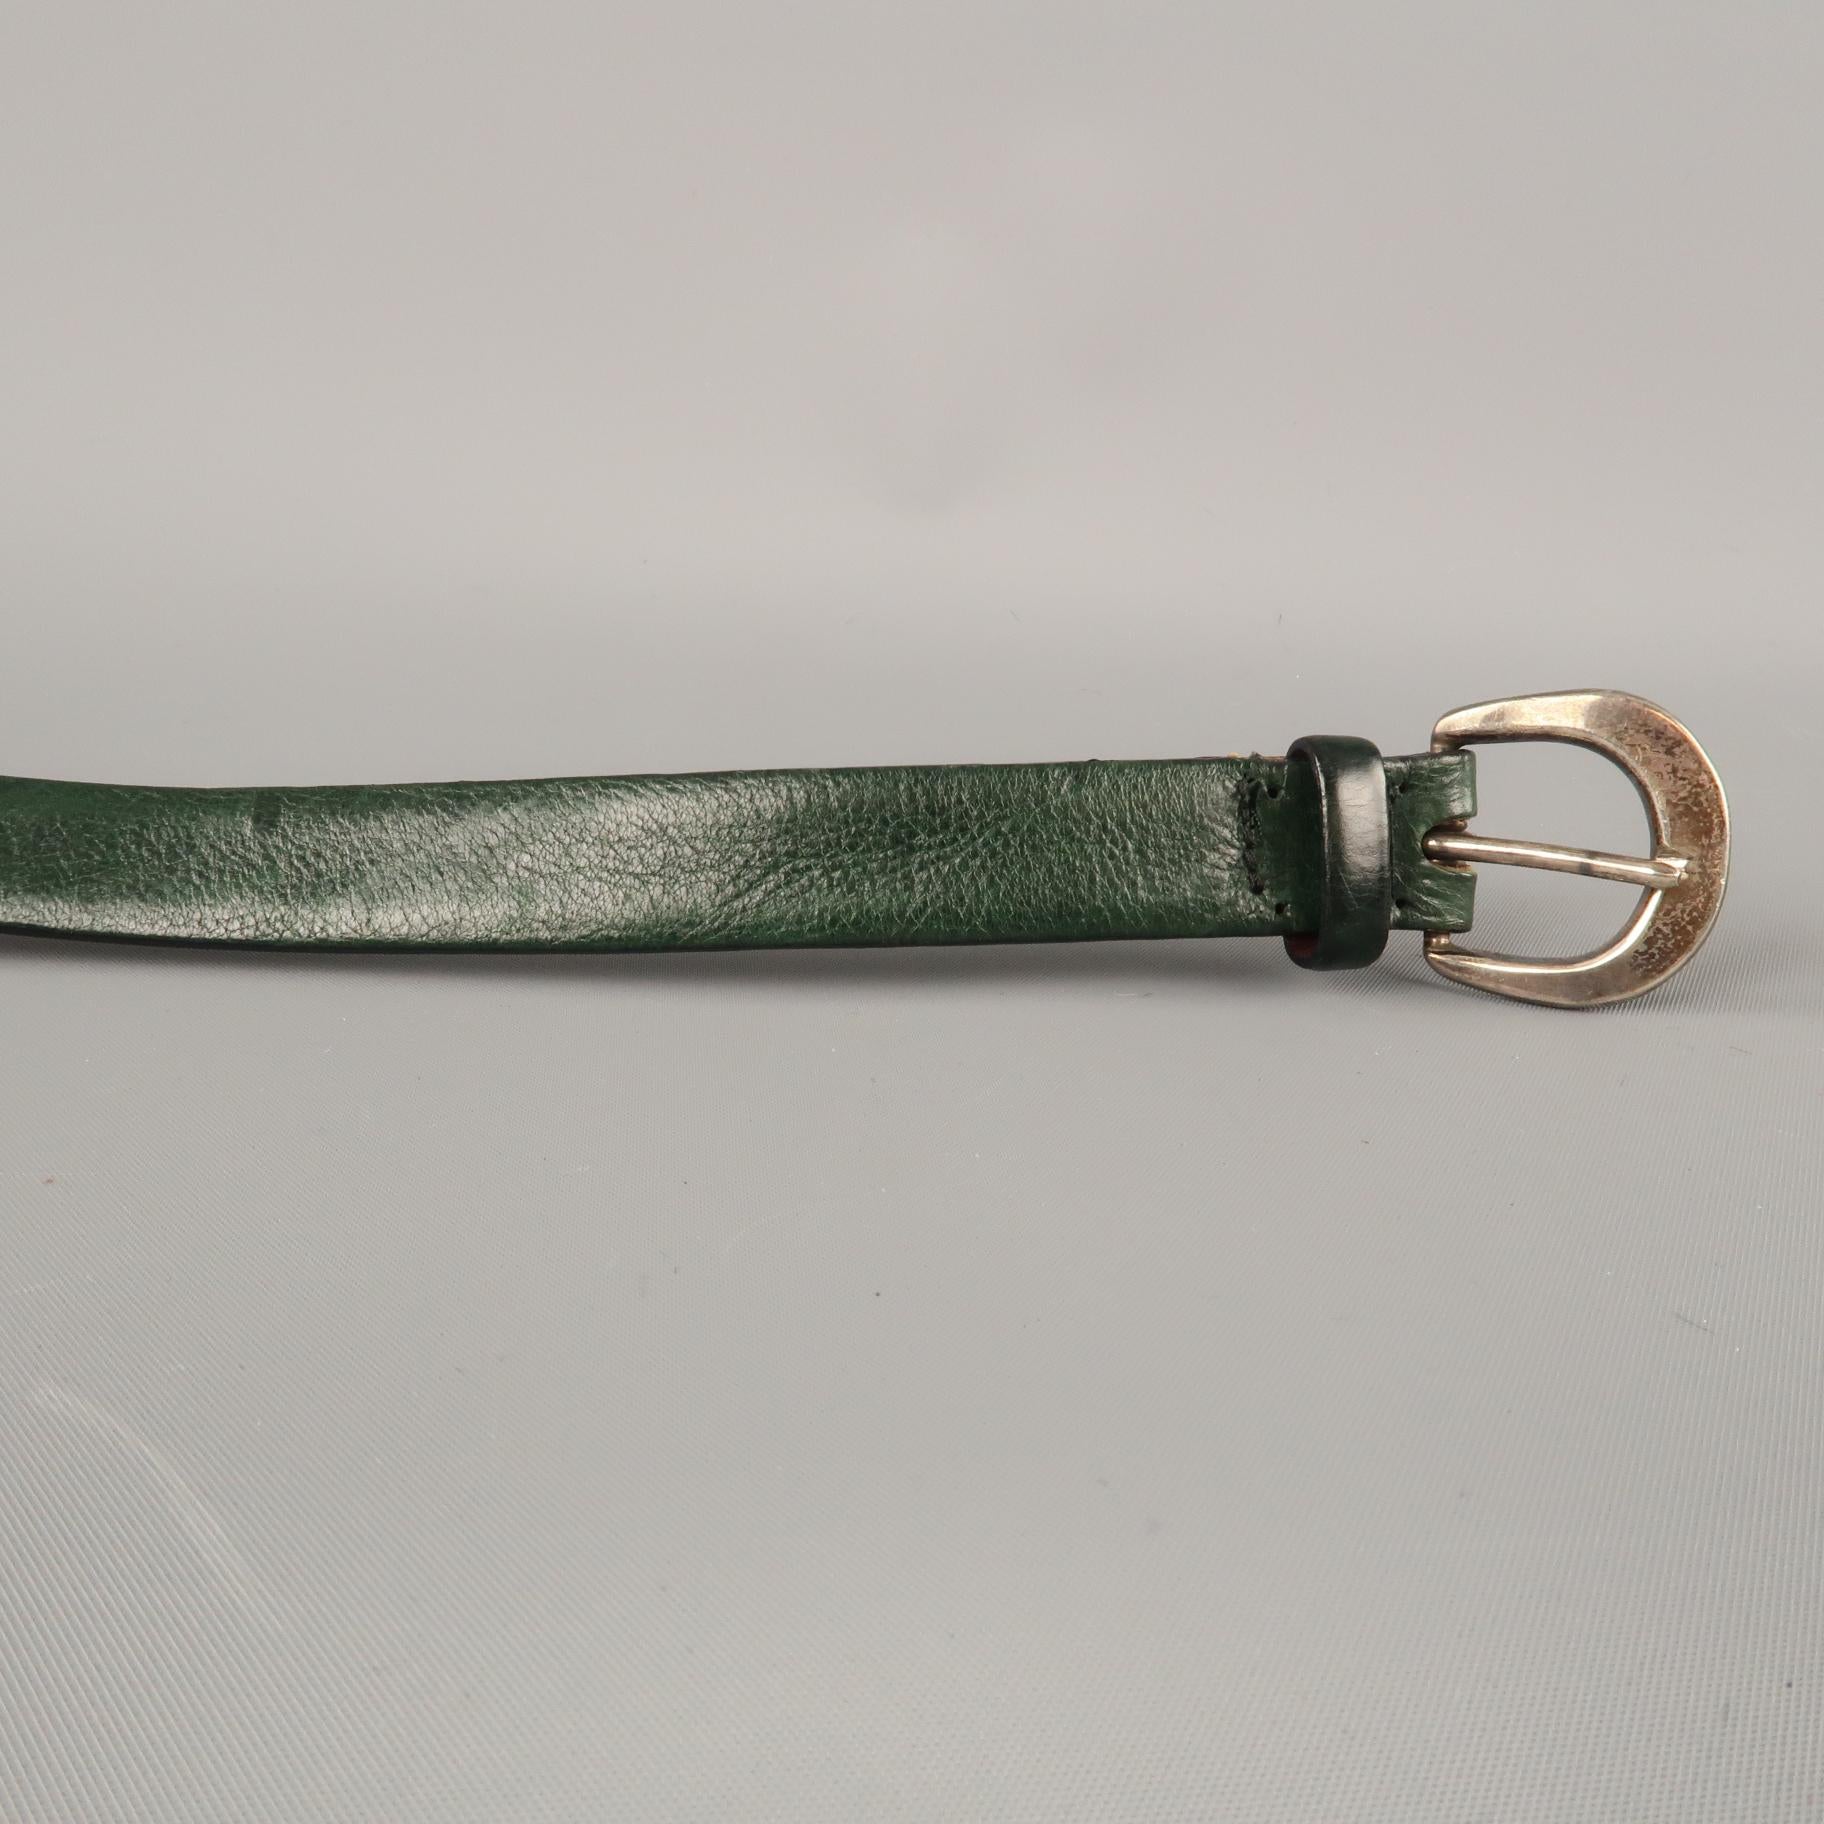 MARC JACOBS  belt comes in a forest green solid leather material, with a skinny strap and featuring a sterling silver buckle. Wear. Made in Italy.

Very Good  Pre-Owned Condition.
Marked: one size.

Measurements:
Length: 44.5 in.
Width: 0.75